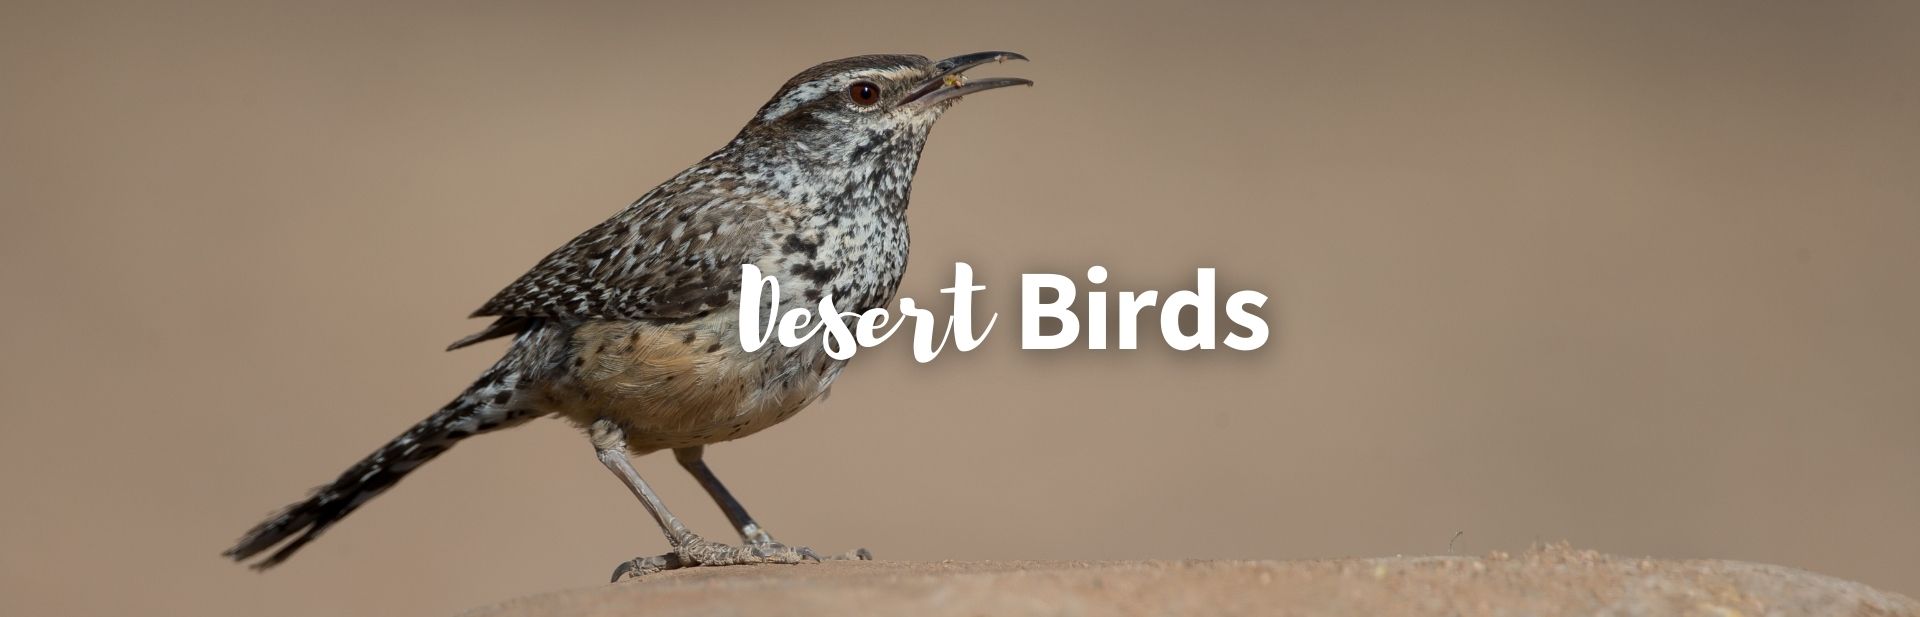 10 Fascinating Desert Birds and Their Unique Adaptations